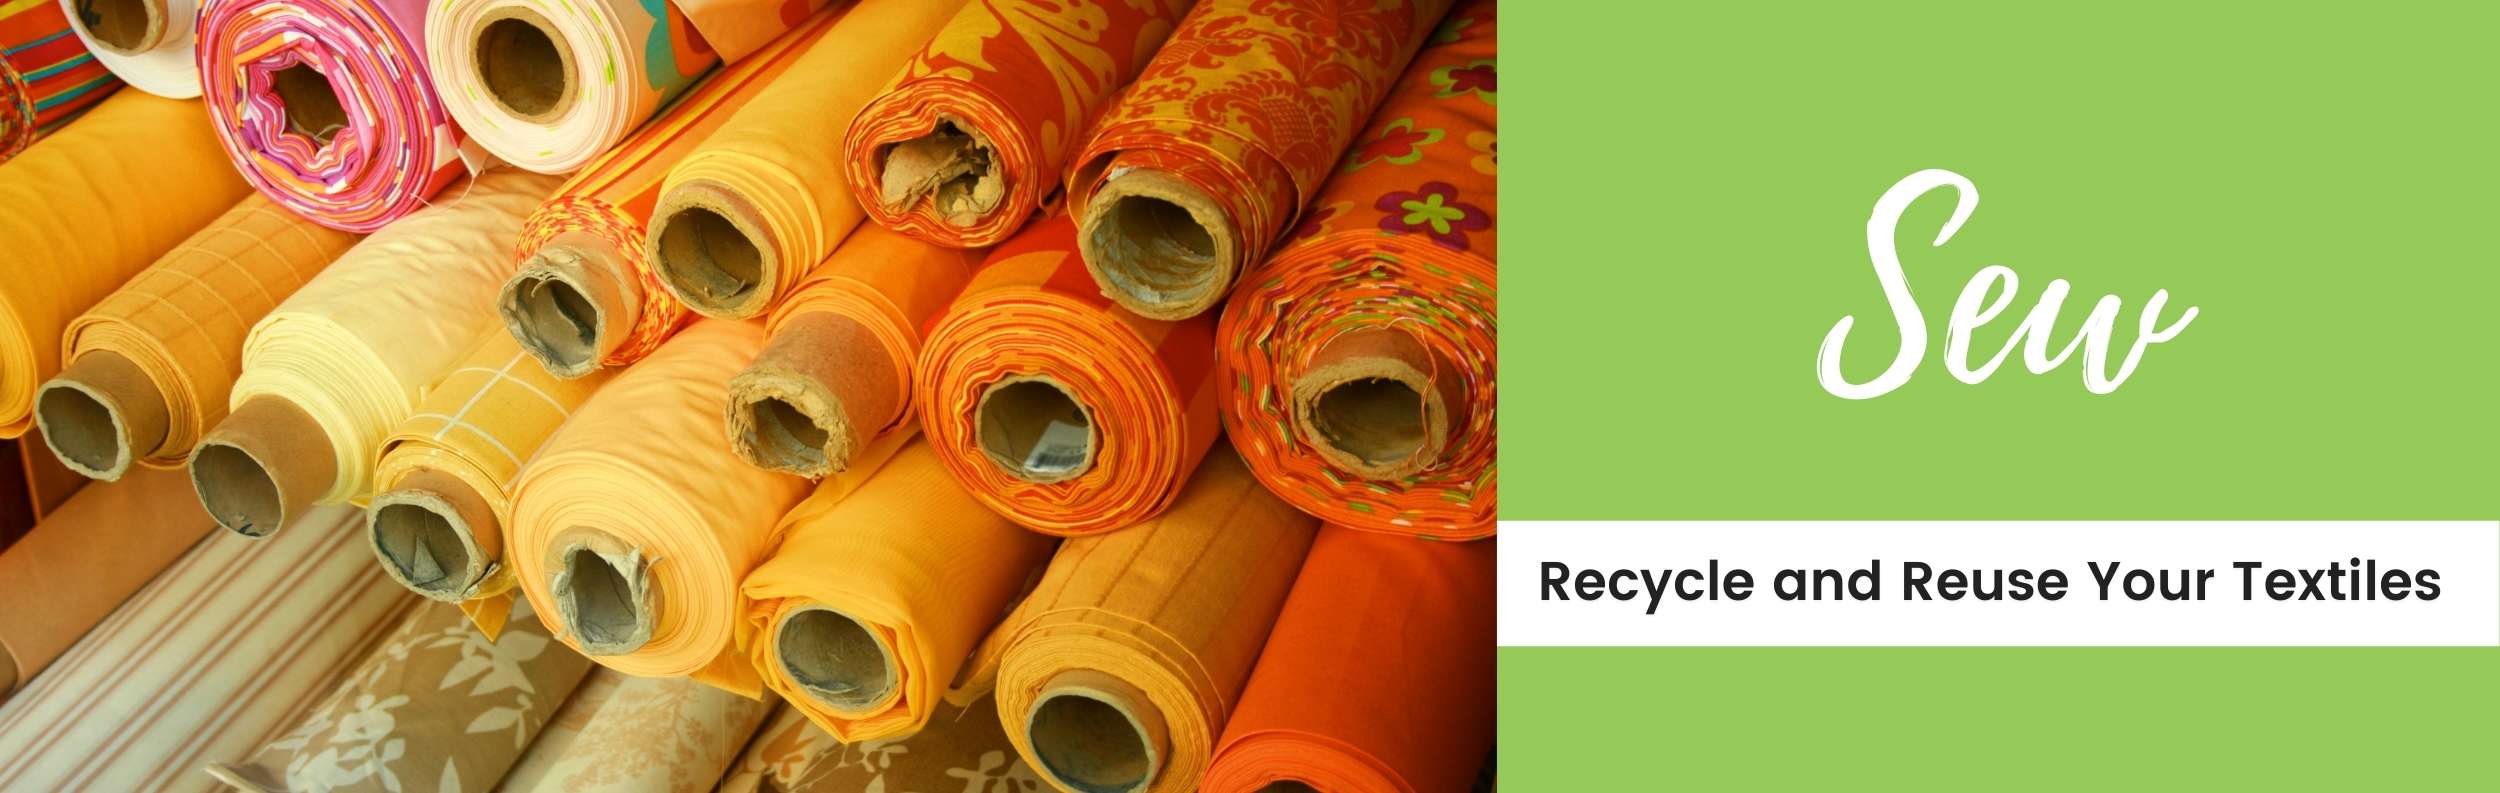 Recycle and Reuse Your Textiles